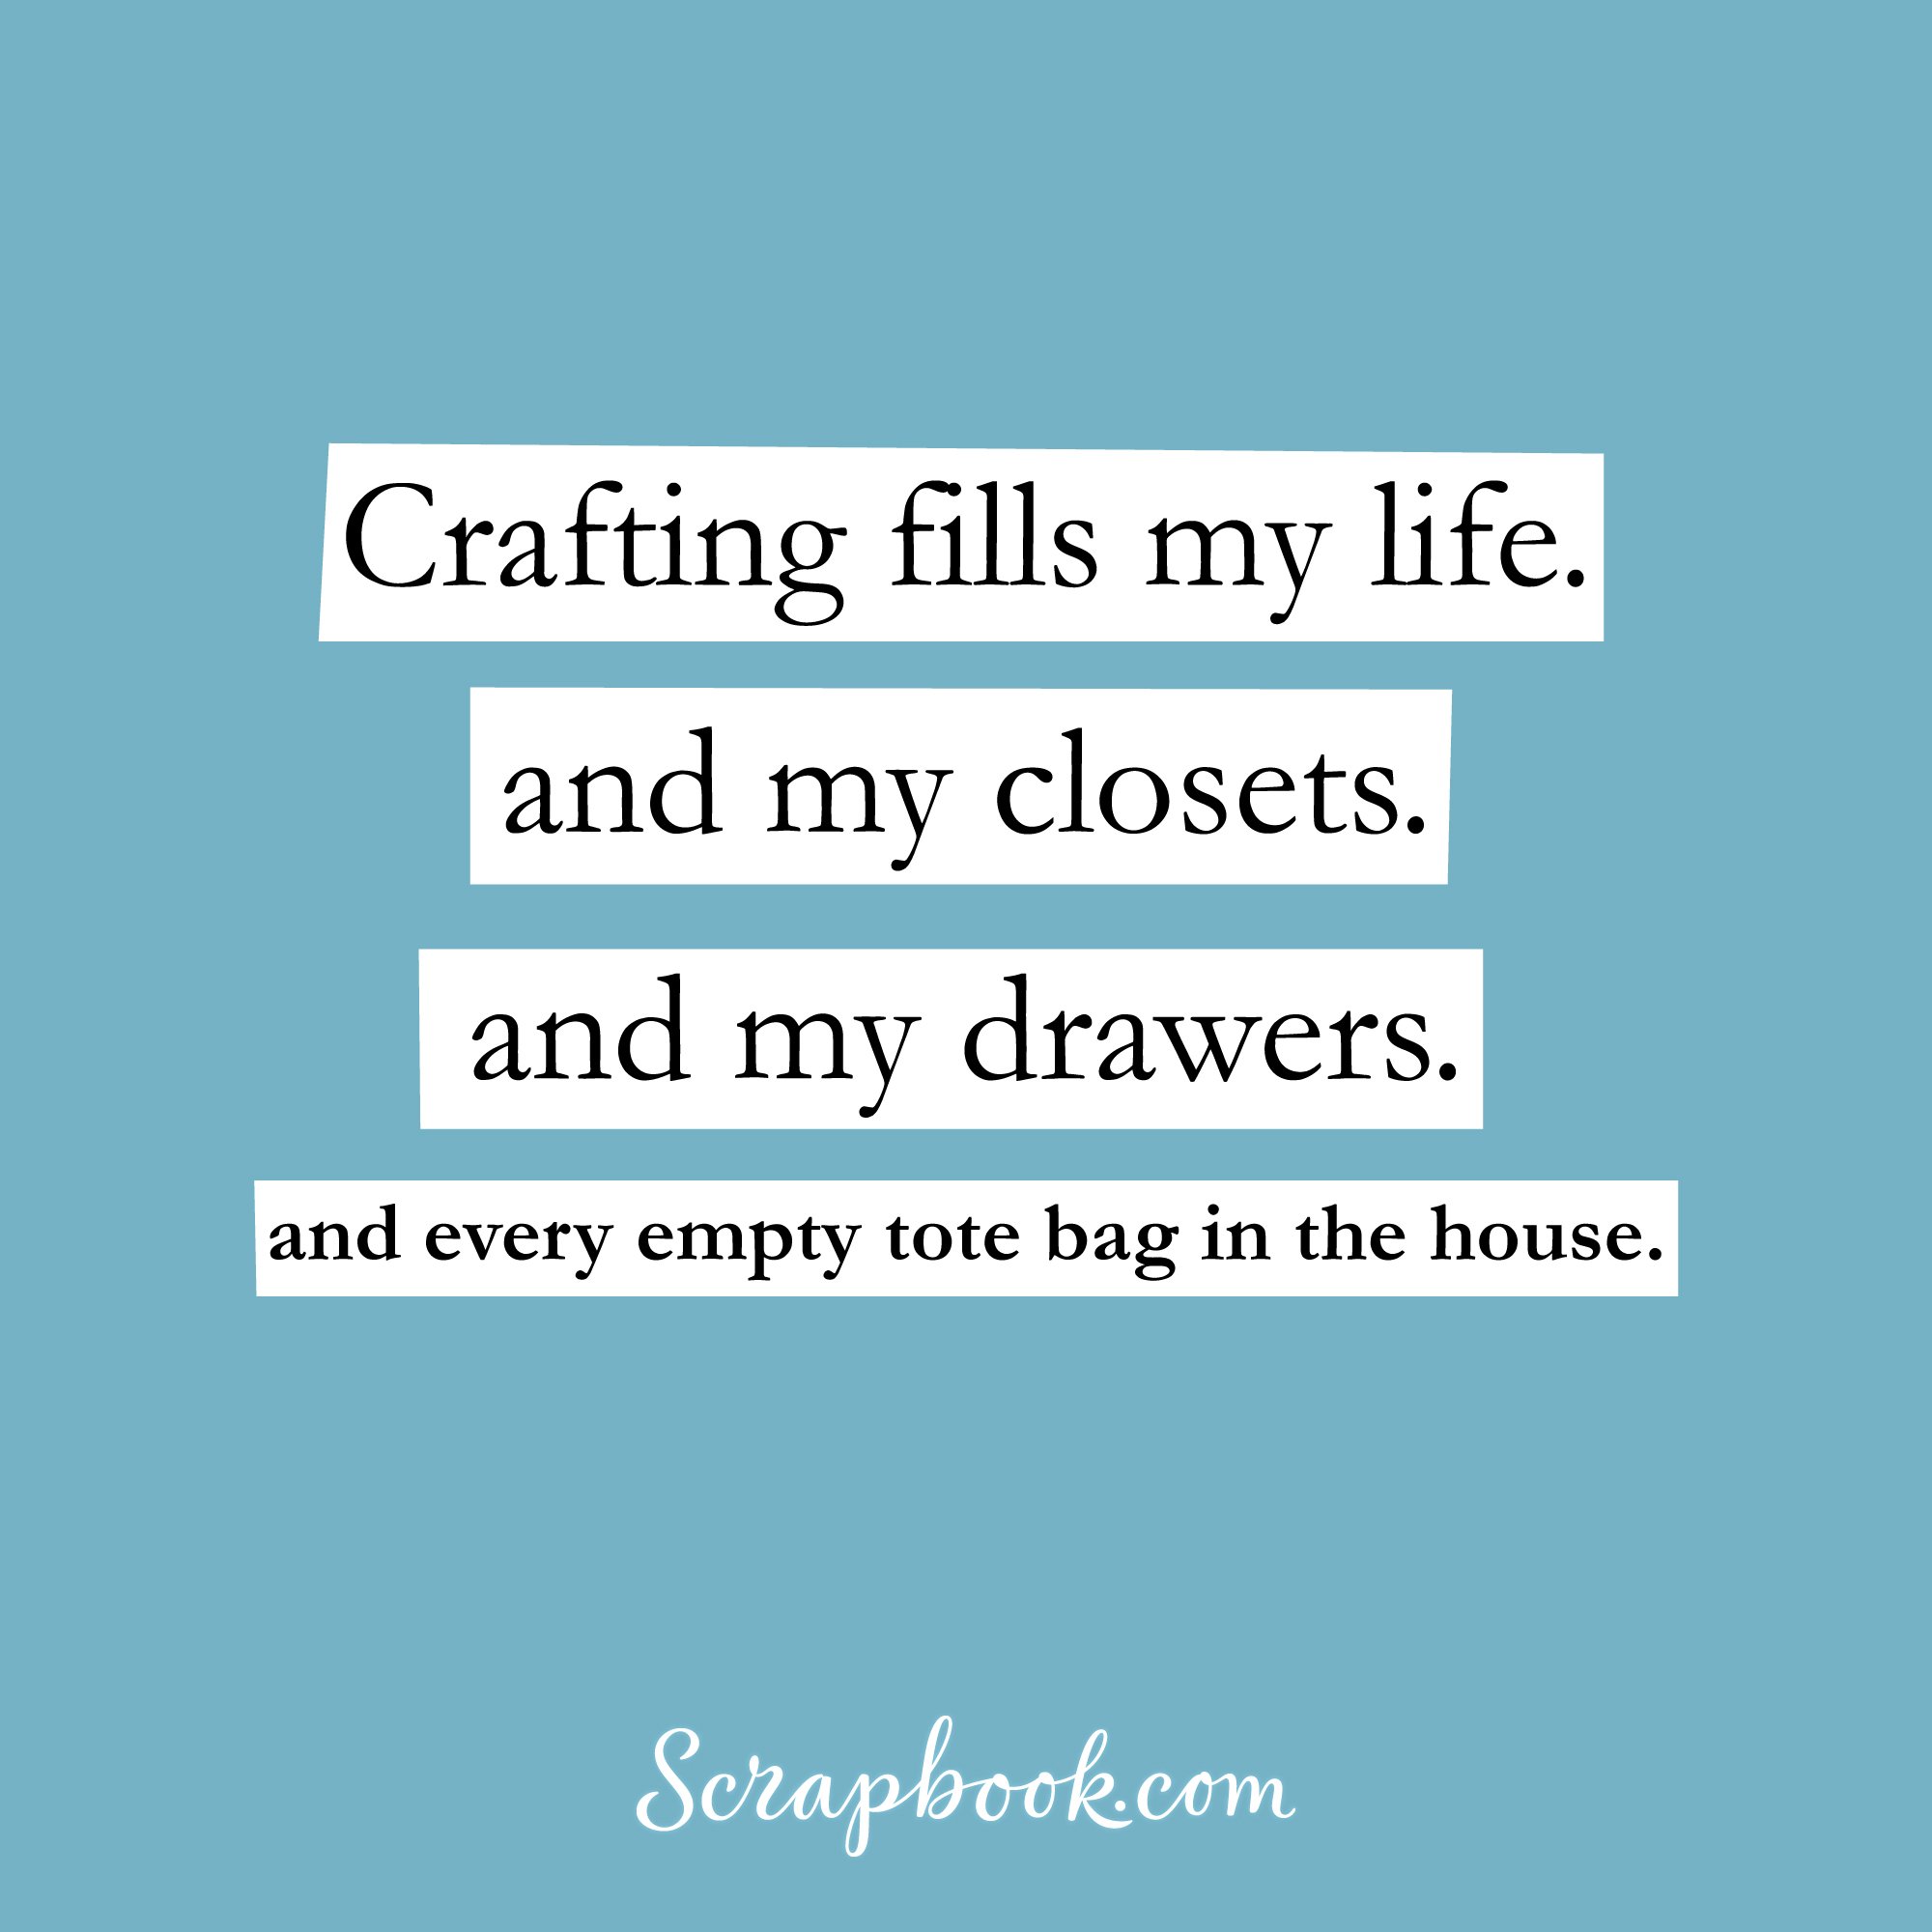 Crafting fills my life. And my closets. And my drawers. And every empty tote bag in the house.